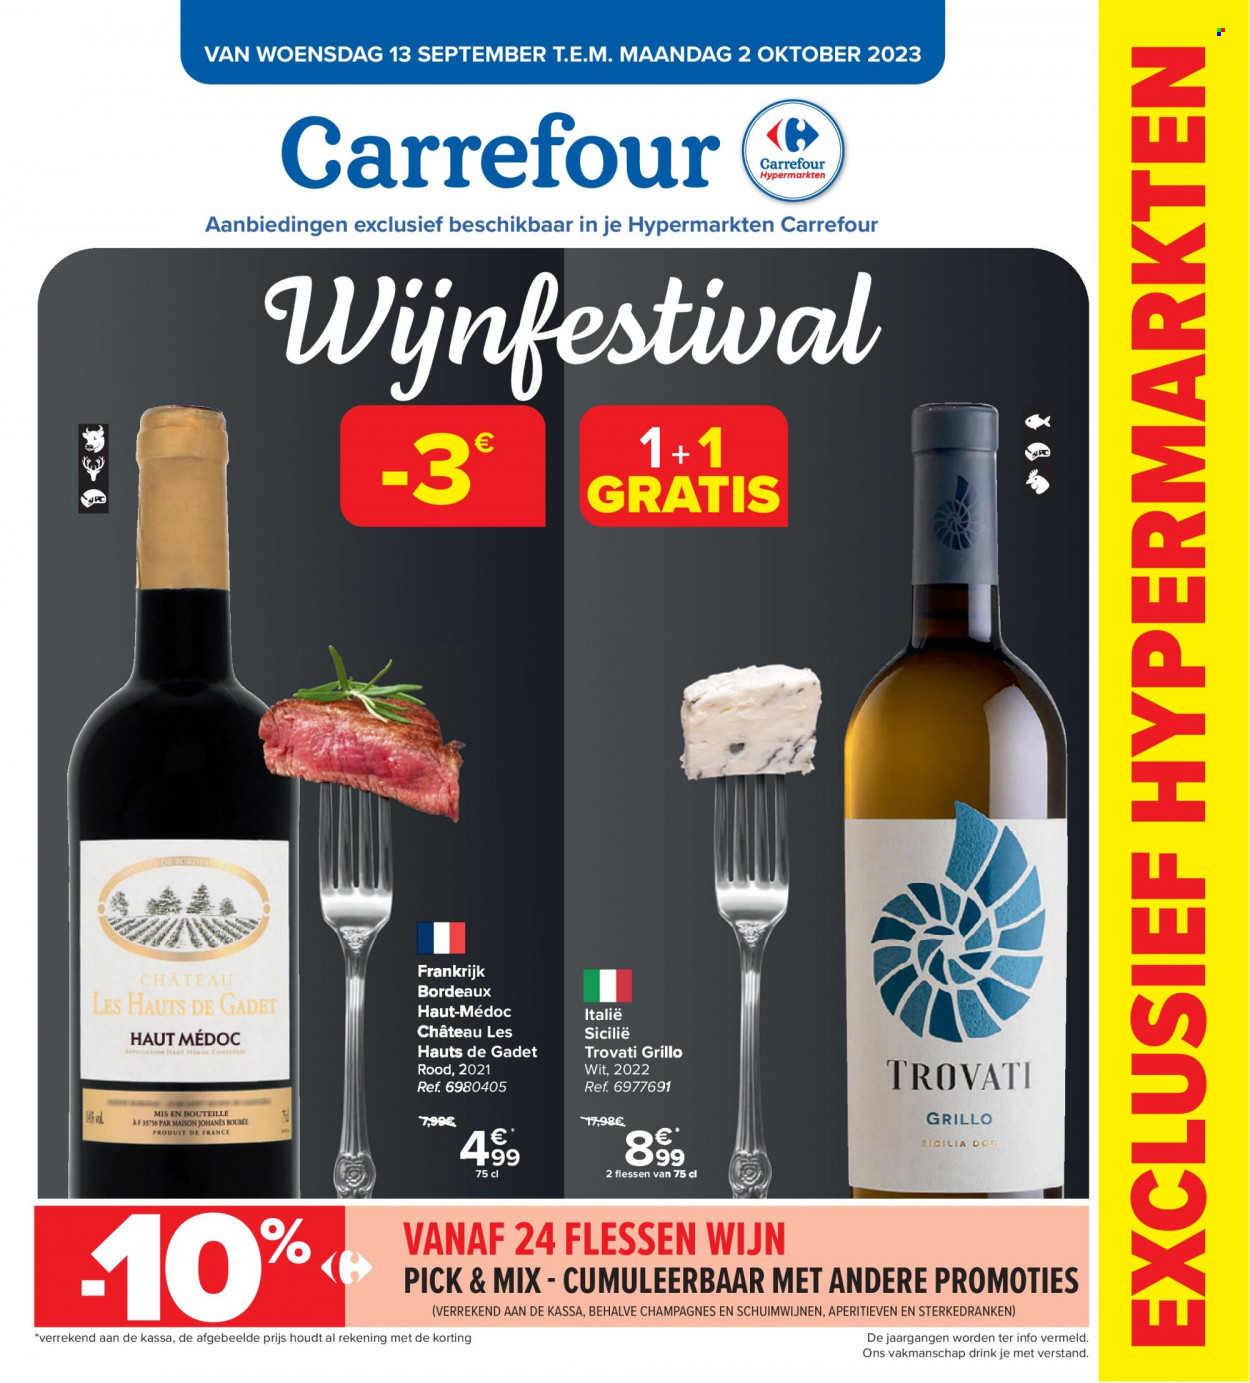 Catalogue Carrefour hypermarkt - 13.9.2023 - 2.10.2023. Page 1.